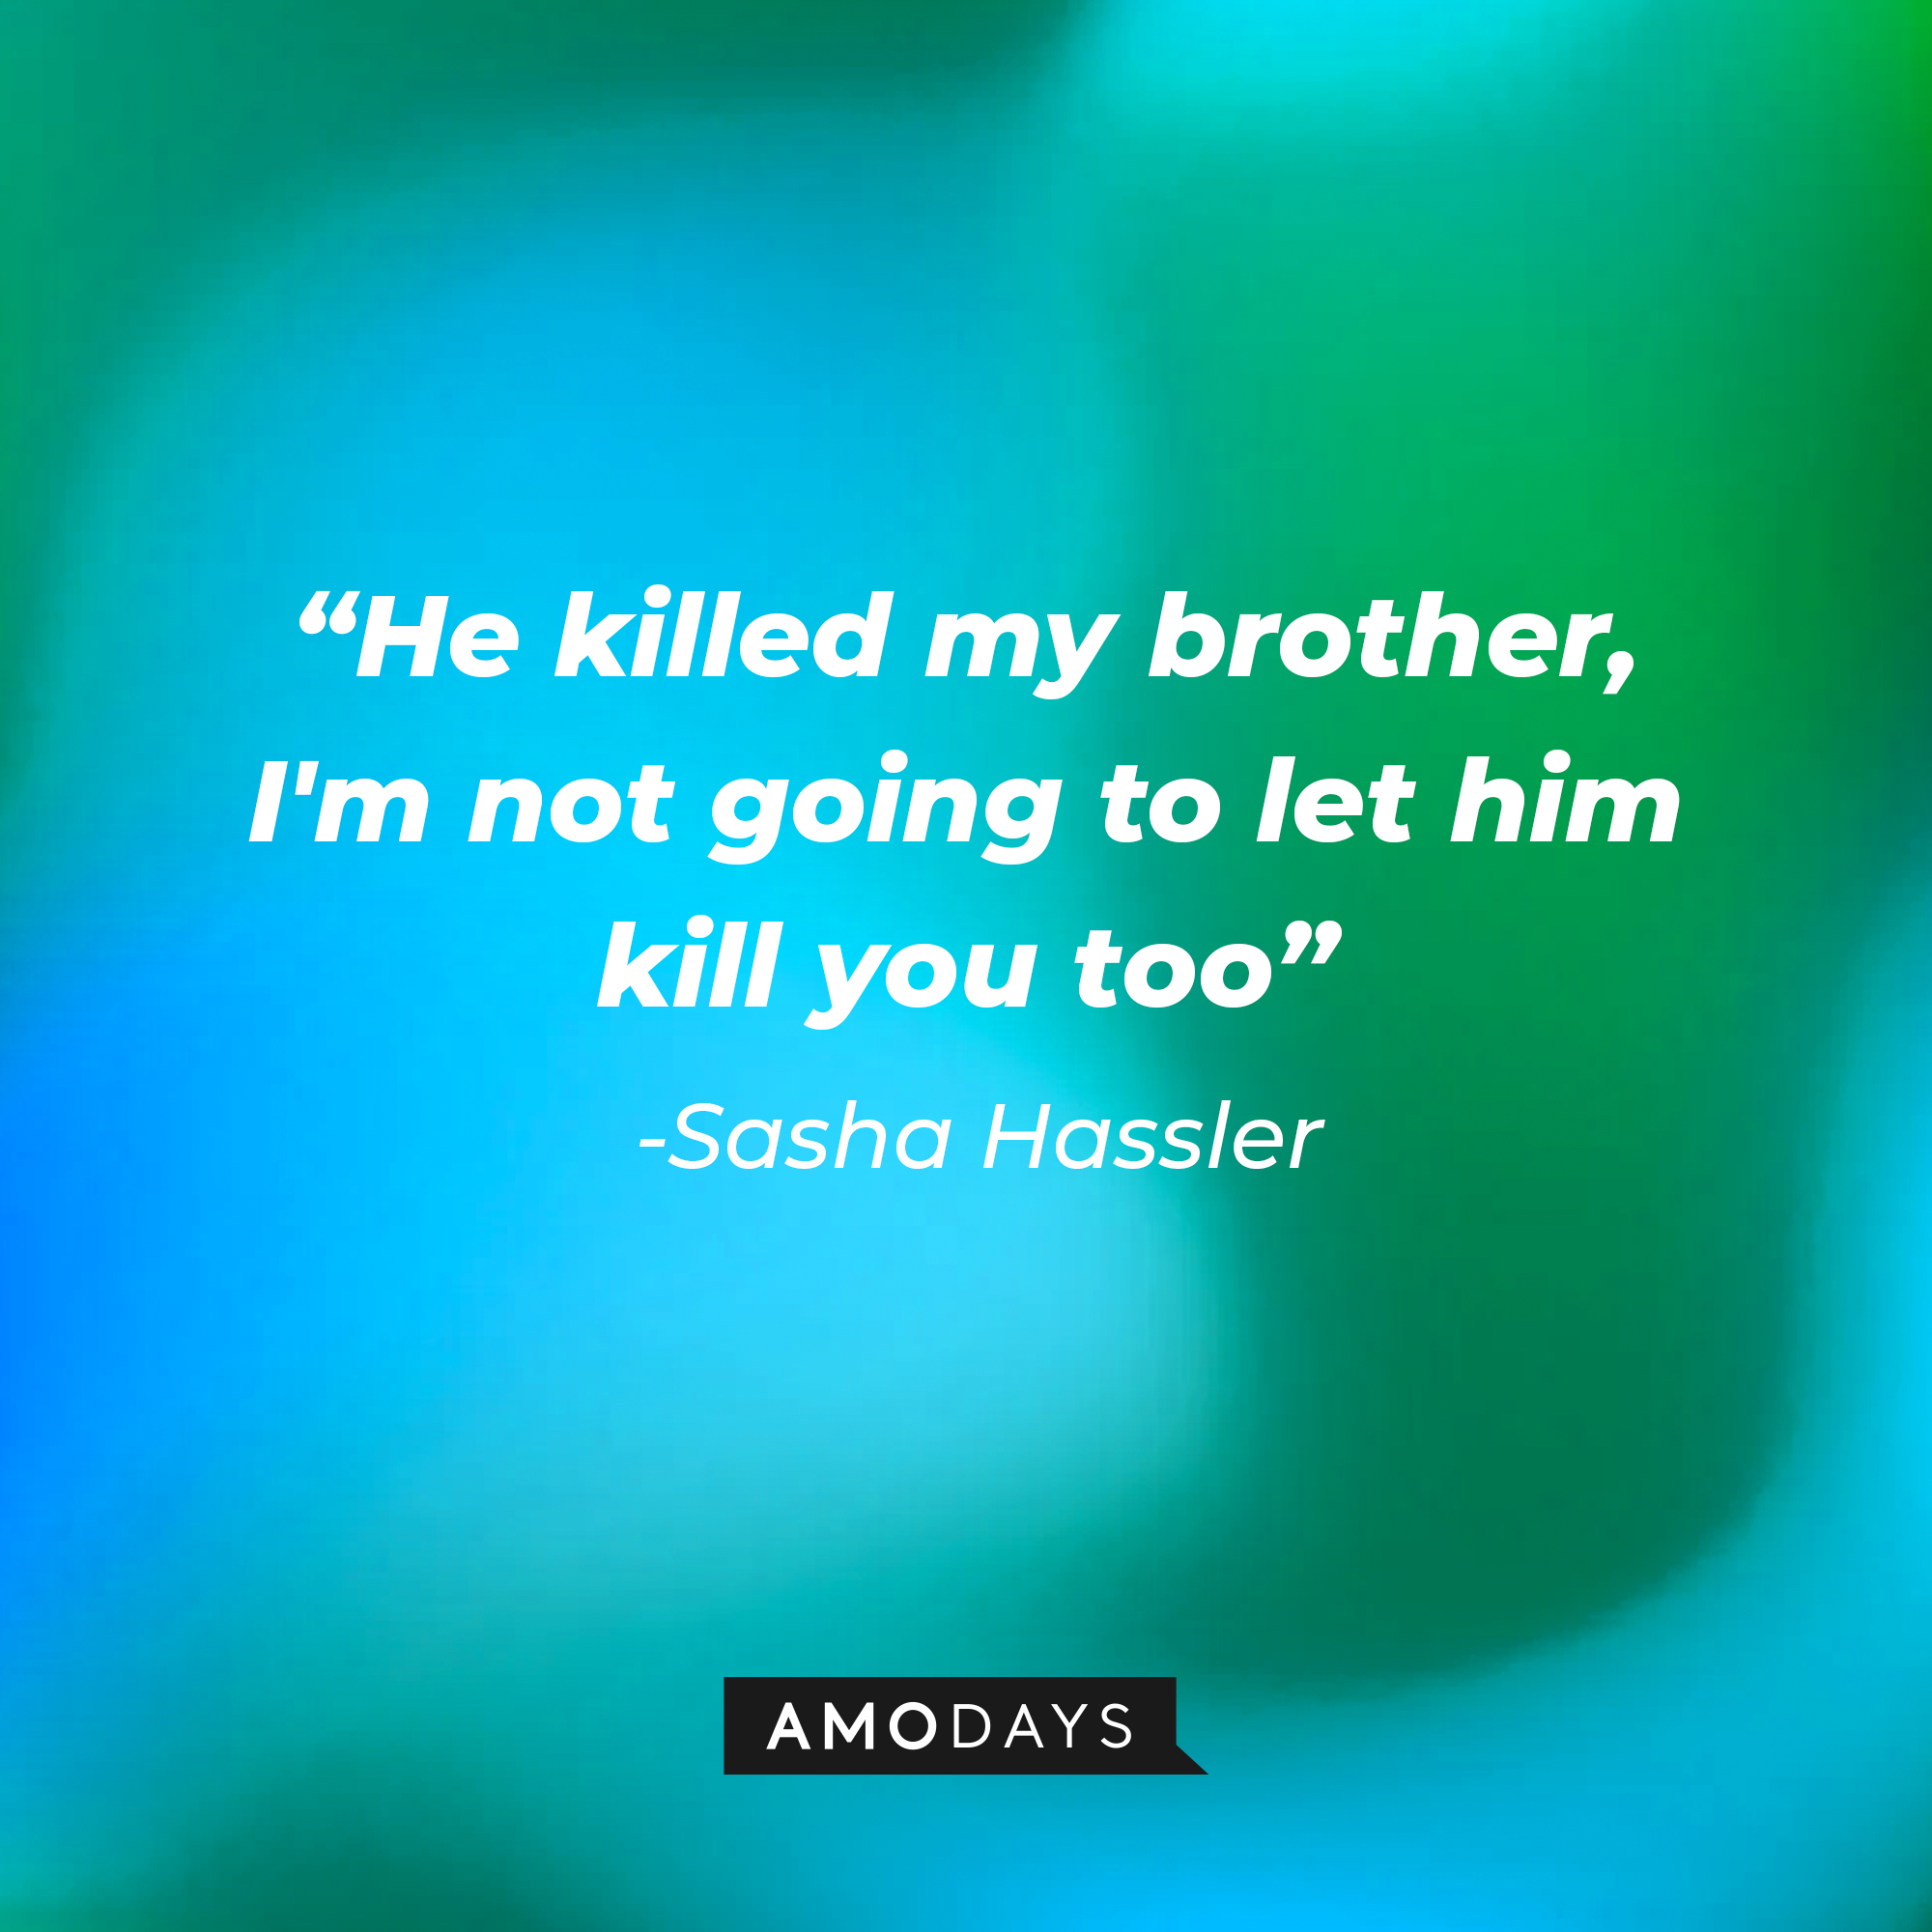 Sasha Hassler's quote: “He killed my brother, I'm not going to let him kill you too” : Source: Amodays